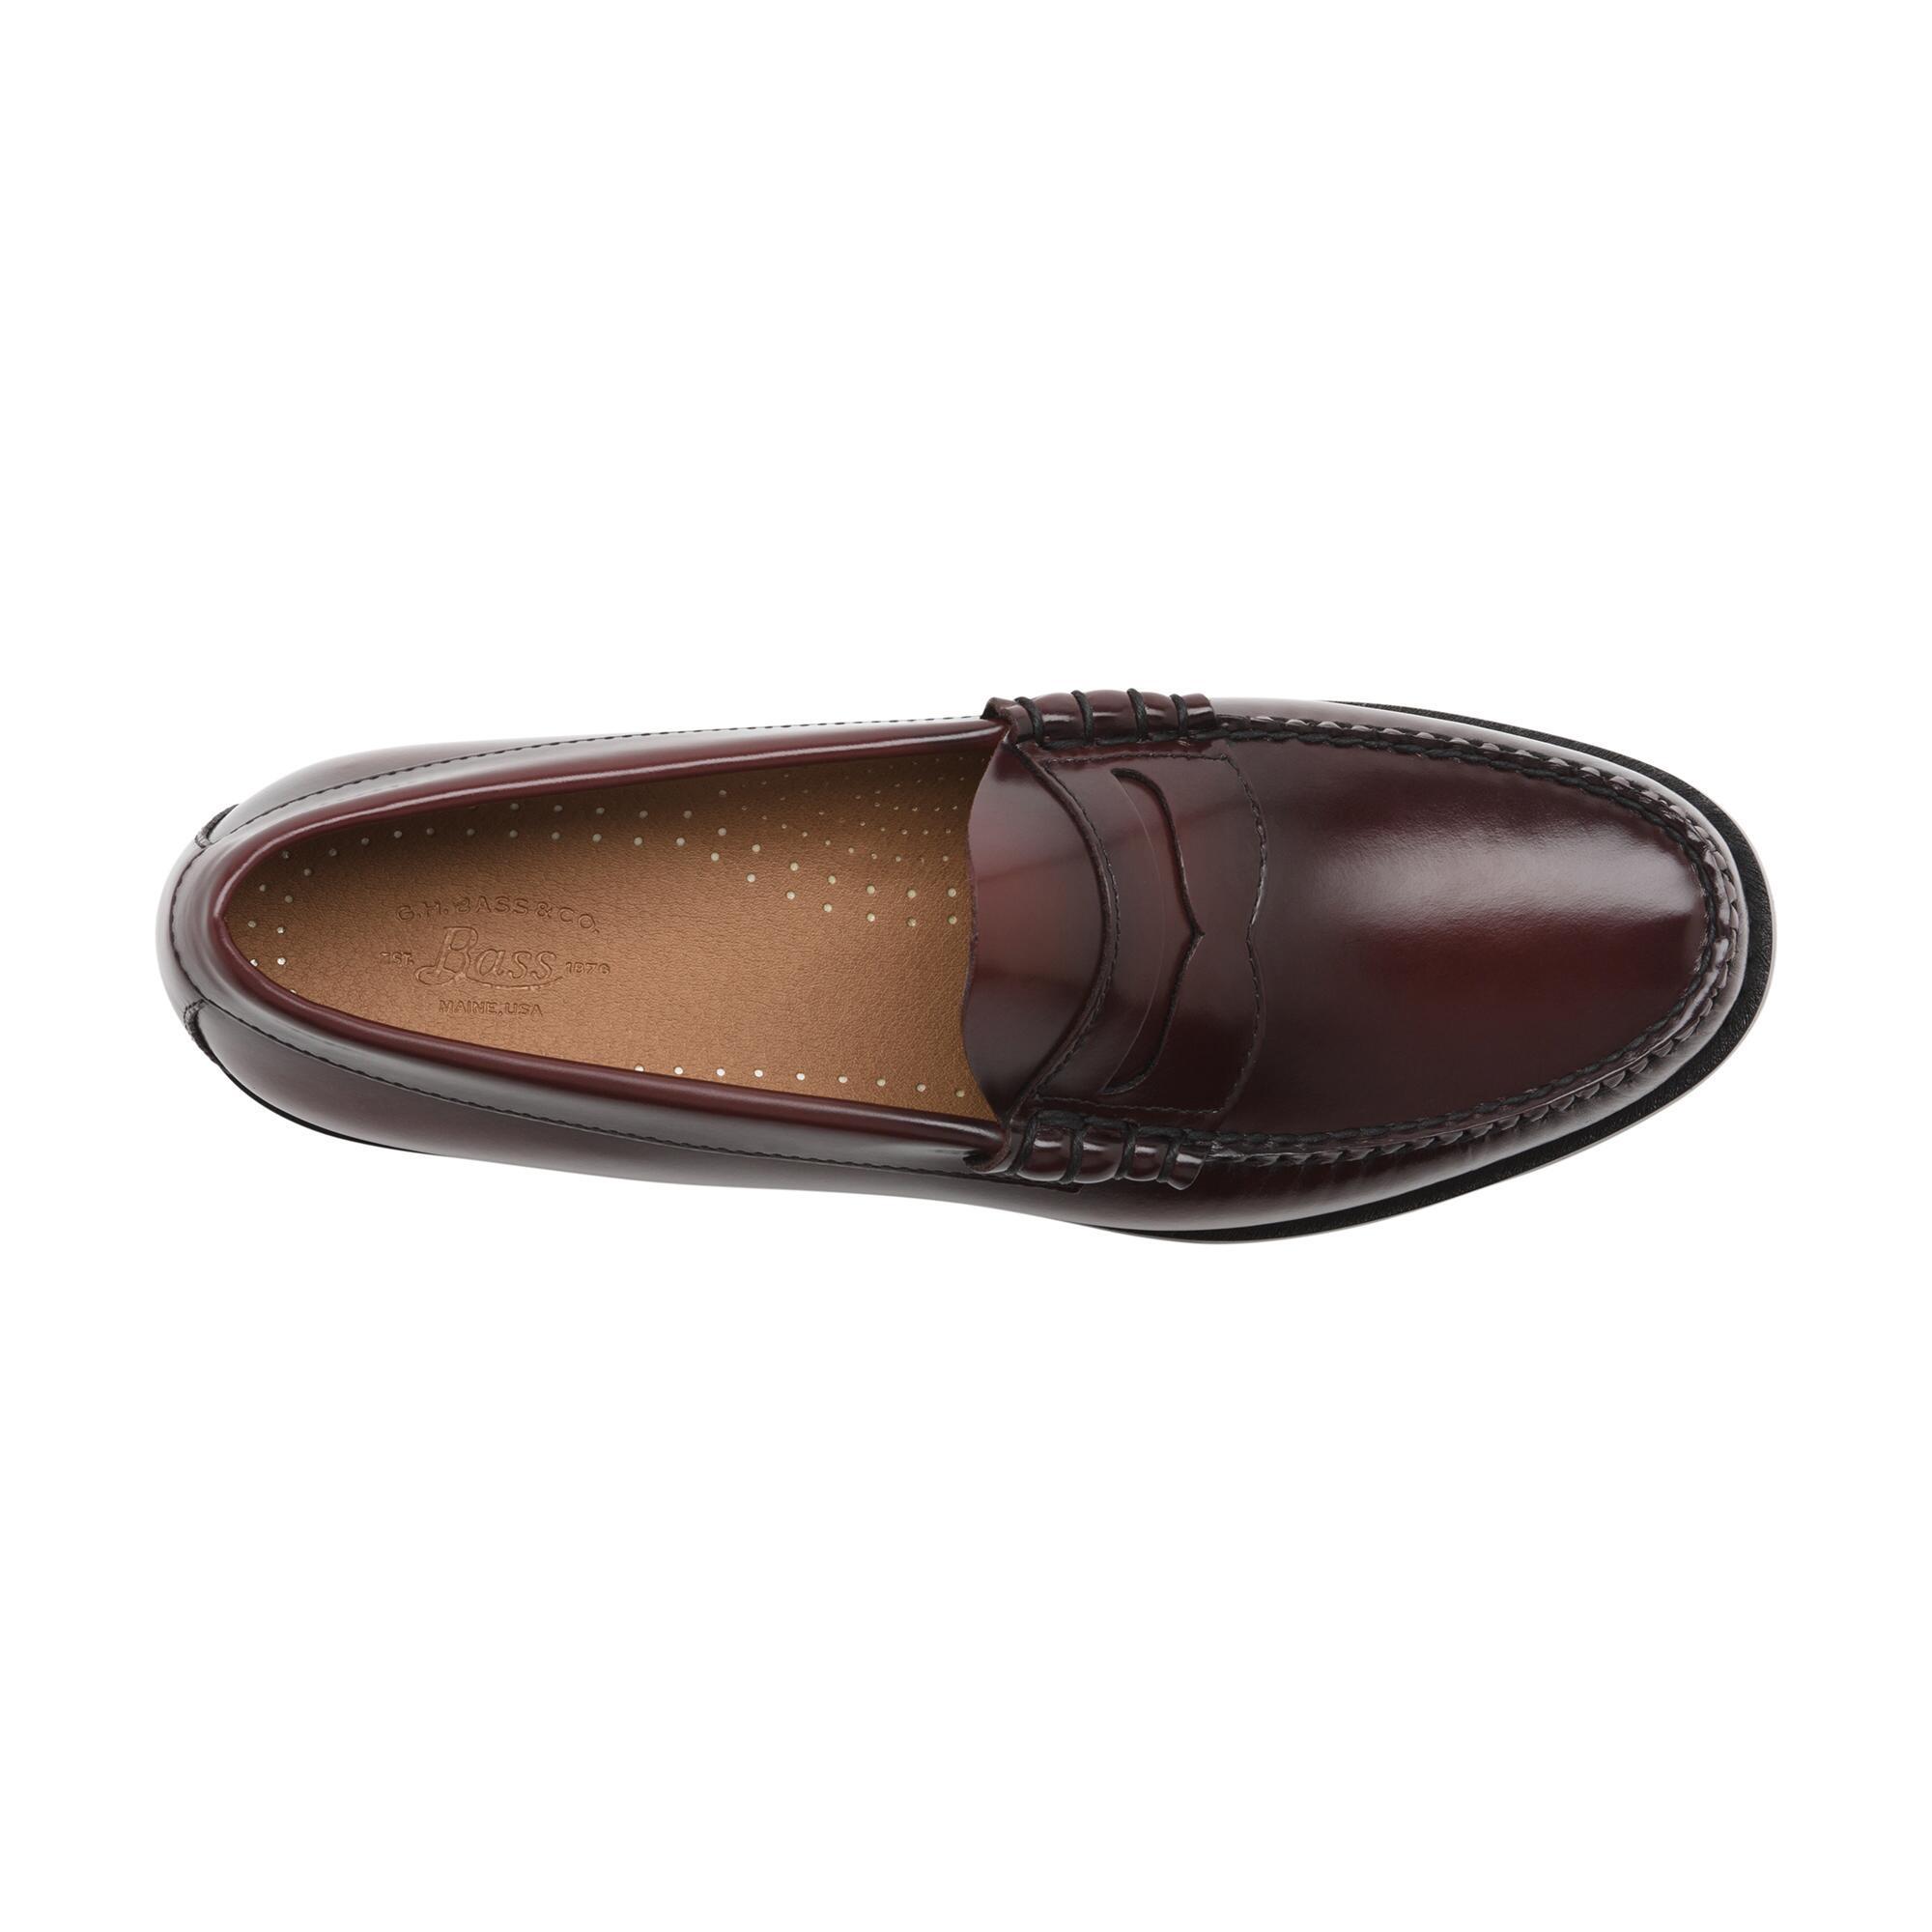 G.H.BASS Leather Bradford Penny Loafer in Burgundy (Purple) for Men - Lyst